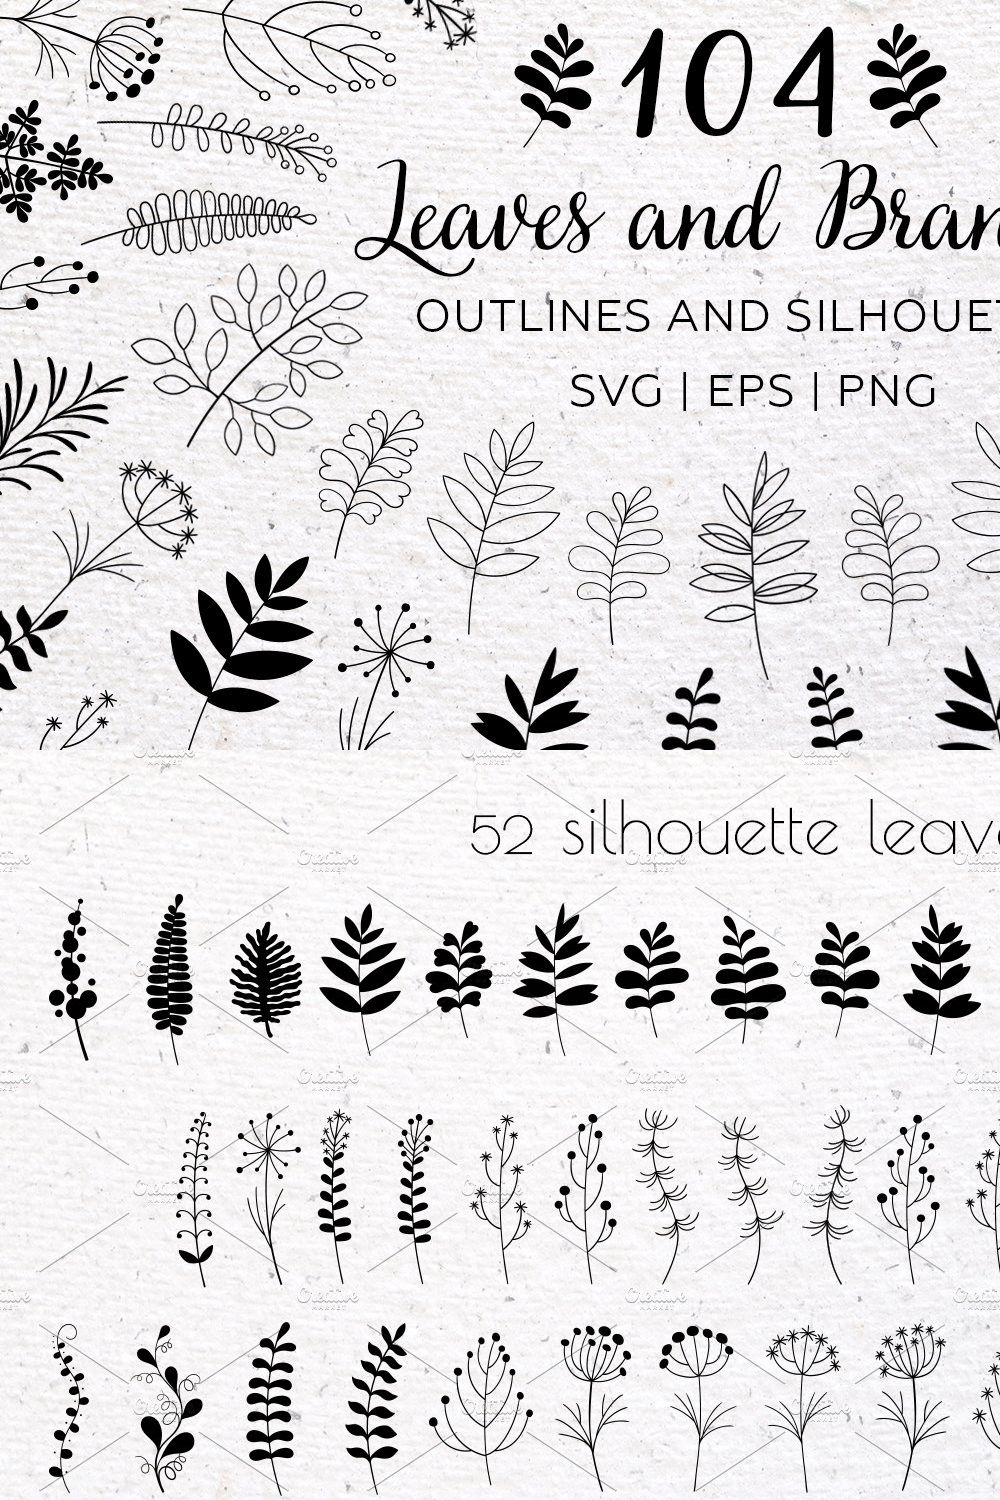 Leaf and Branch doodle clipart pinterest preview image.